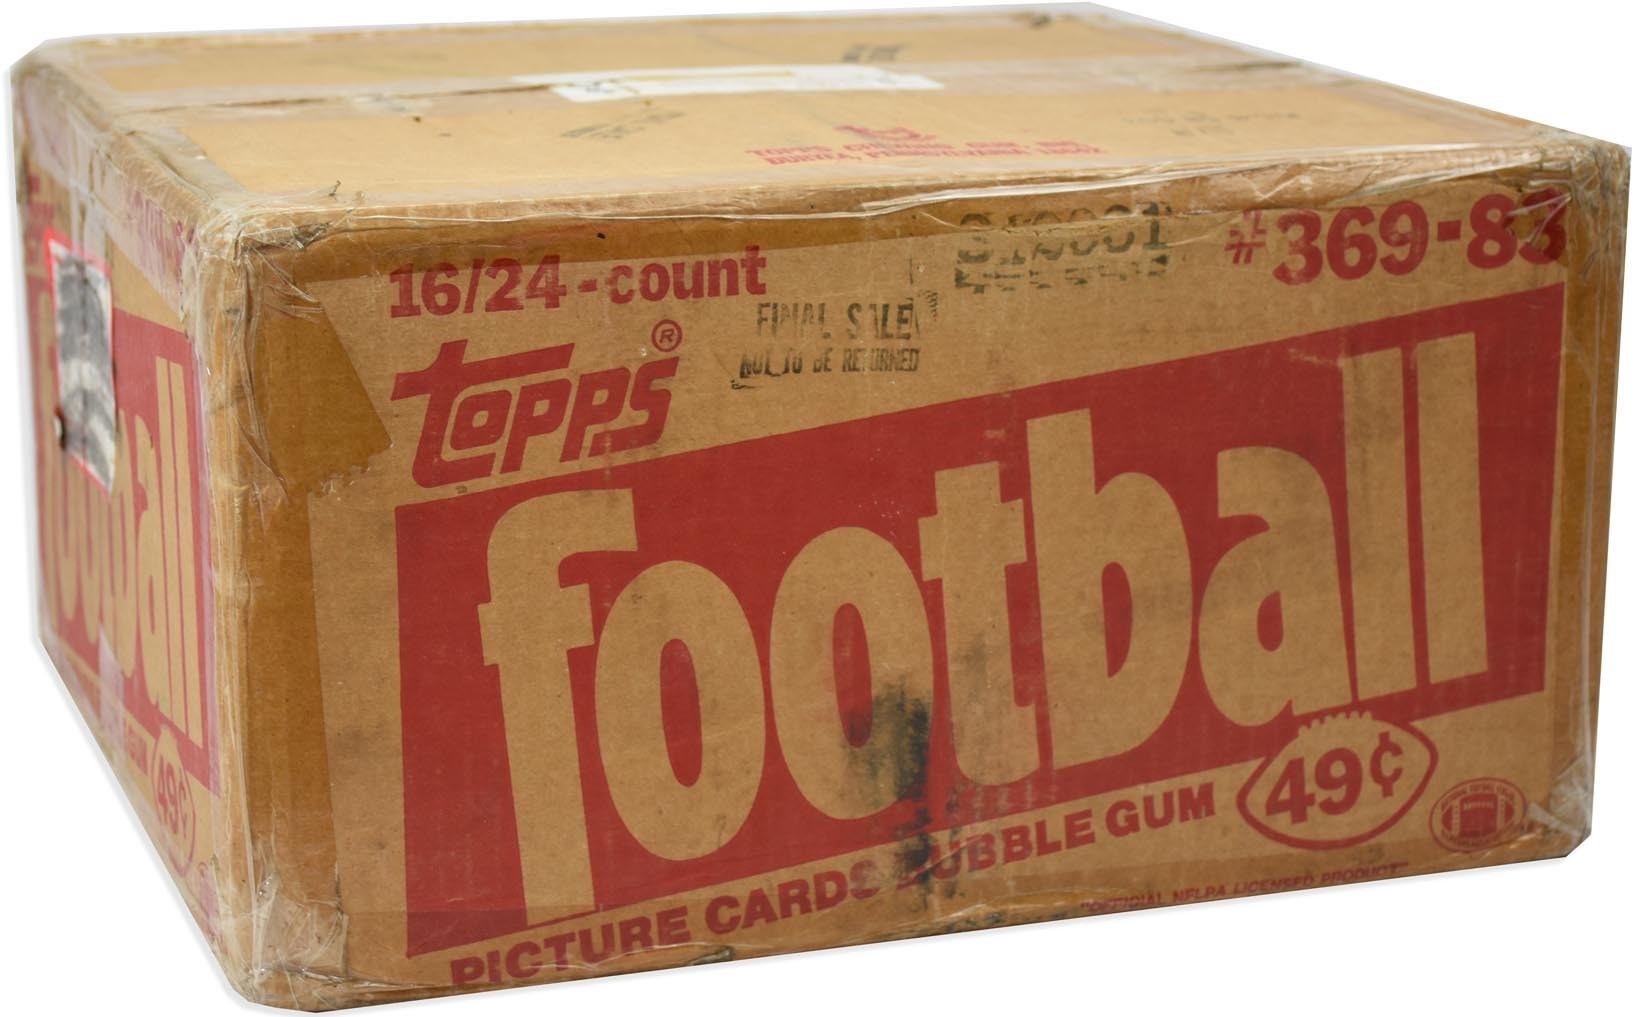 Unopened Wax Packs Boxes and Cases - 1983 Topps Football Unopened Cello Case